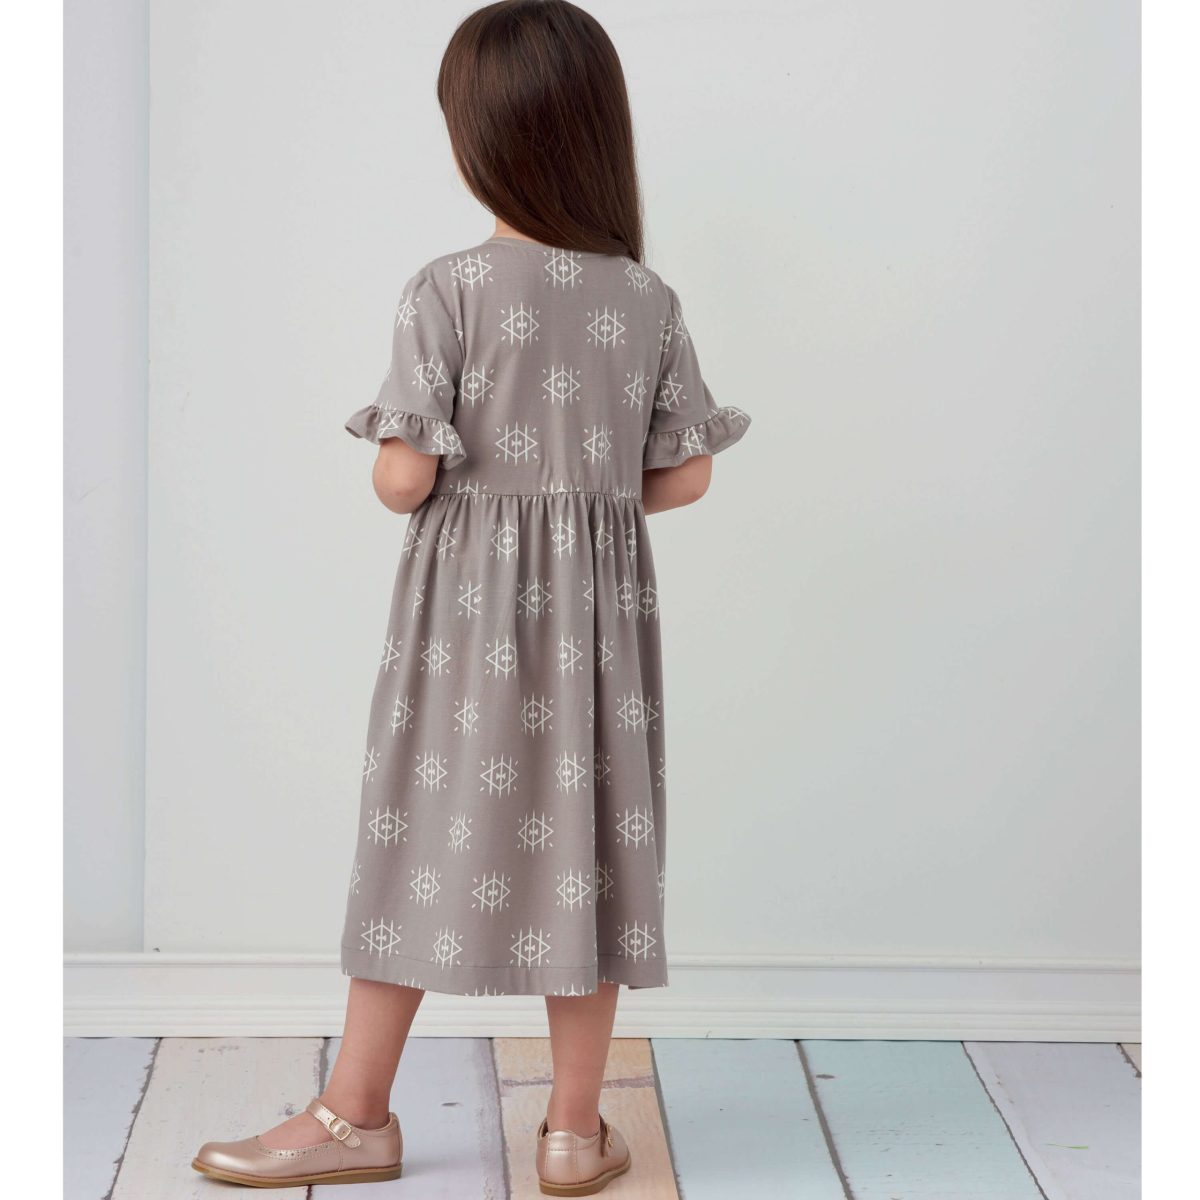 Simplicity Sewing Pattern S9277 Misses' and Children's Dresses